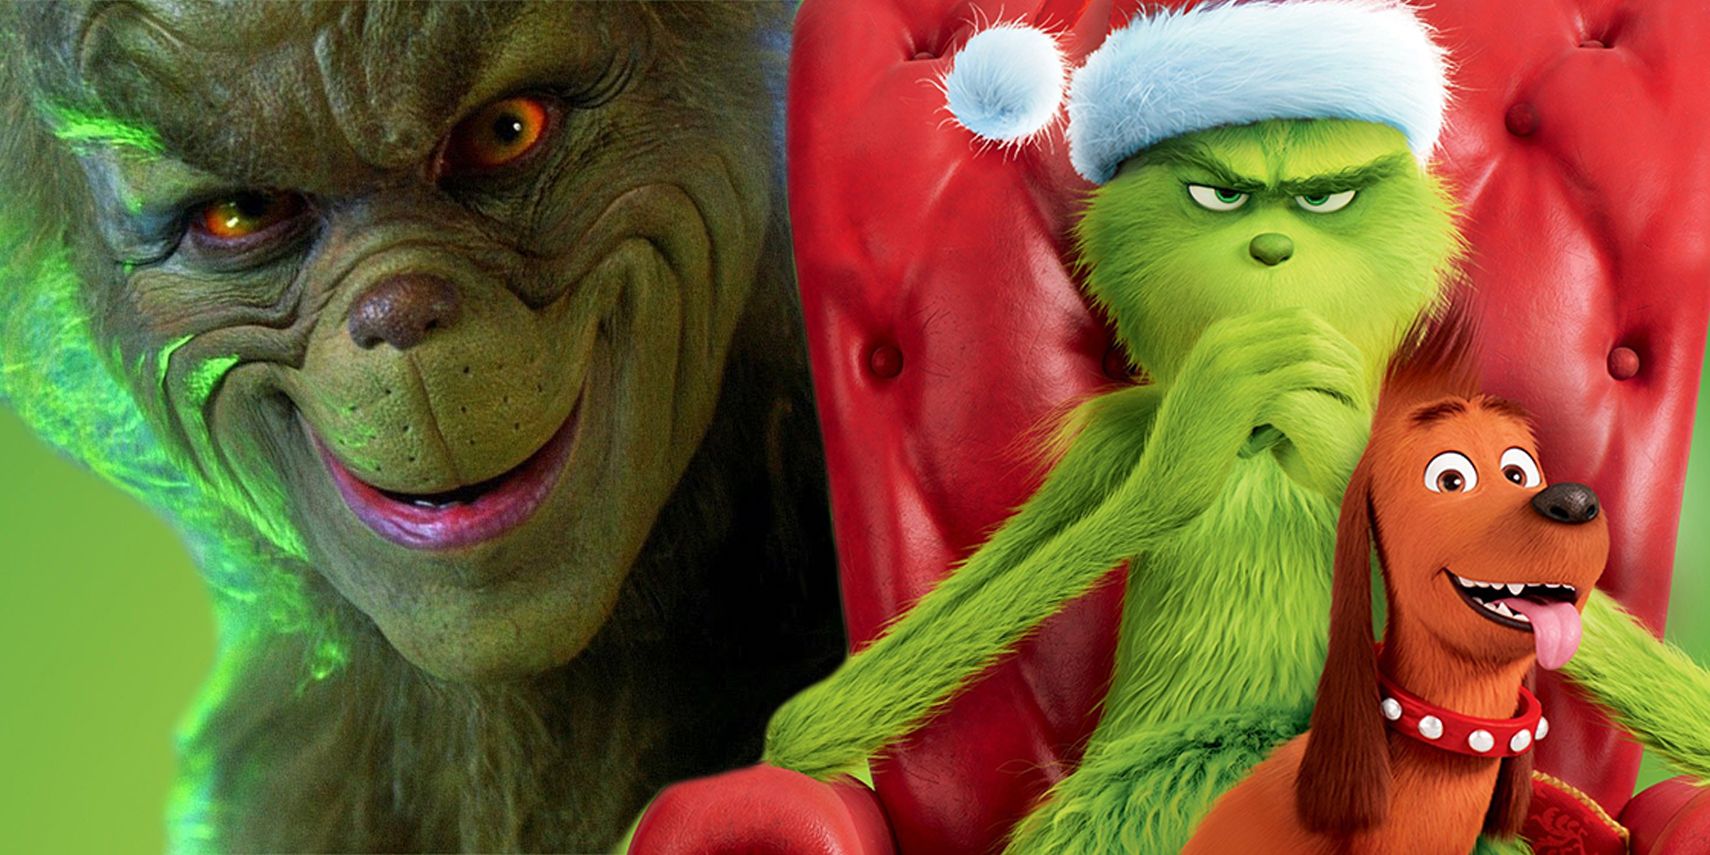 How the Grinch Stole Christmas 2000 and The Grinch 2018